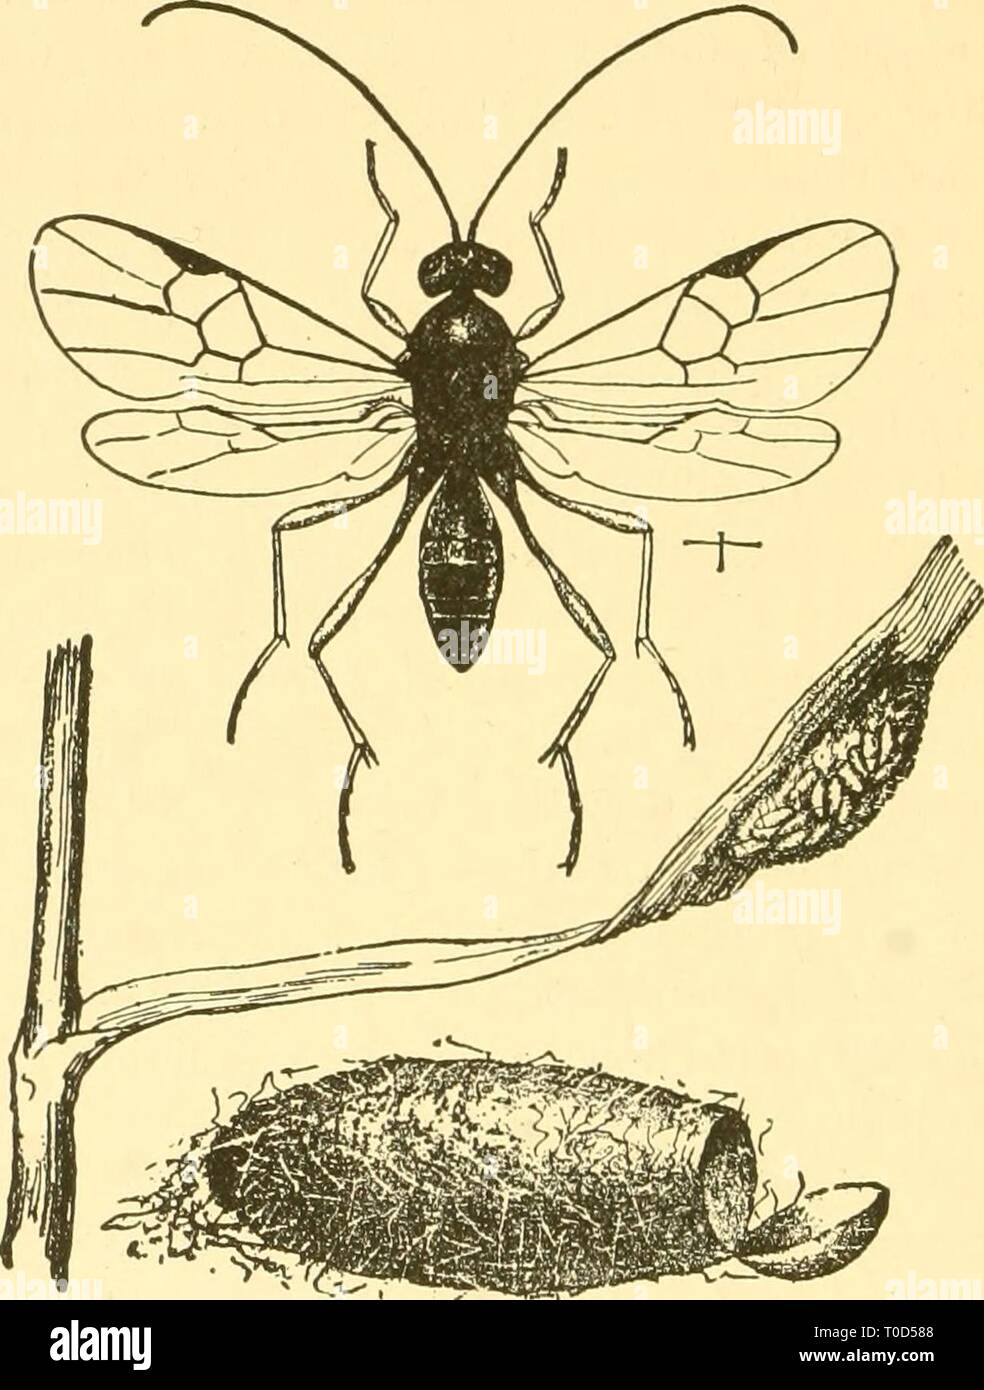 Economic entomology for the farmer Economic entomology for the farmer and fruit-grower economicentomolo01smit Year: 1906  384 AN ECONOMIC ENTOMOLOGY. Most of these parasites have the disadvantage of not influ- encing in the least the amount of injury done by the host; they simply prevent it from changing to an adult. It often happens that spinning caterpillars even complete their cocoon, and in this we find the mass of parasitic cocoons instead of the Lepidopter- ous pupa. On the other hand, some of them complete their Fig. 442.    Apanteles species.—Little mass of cocoons on leaf, replacing a Stock Photo